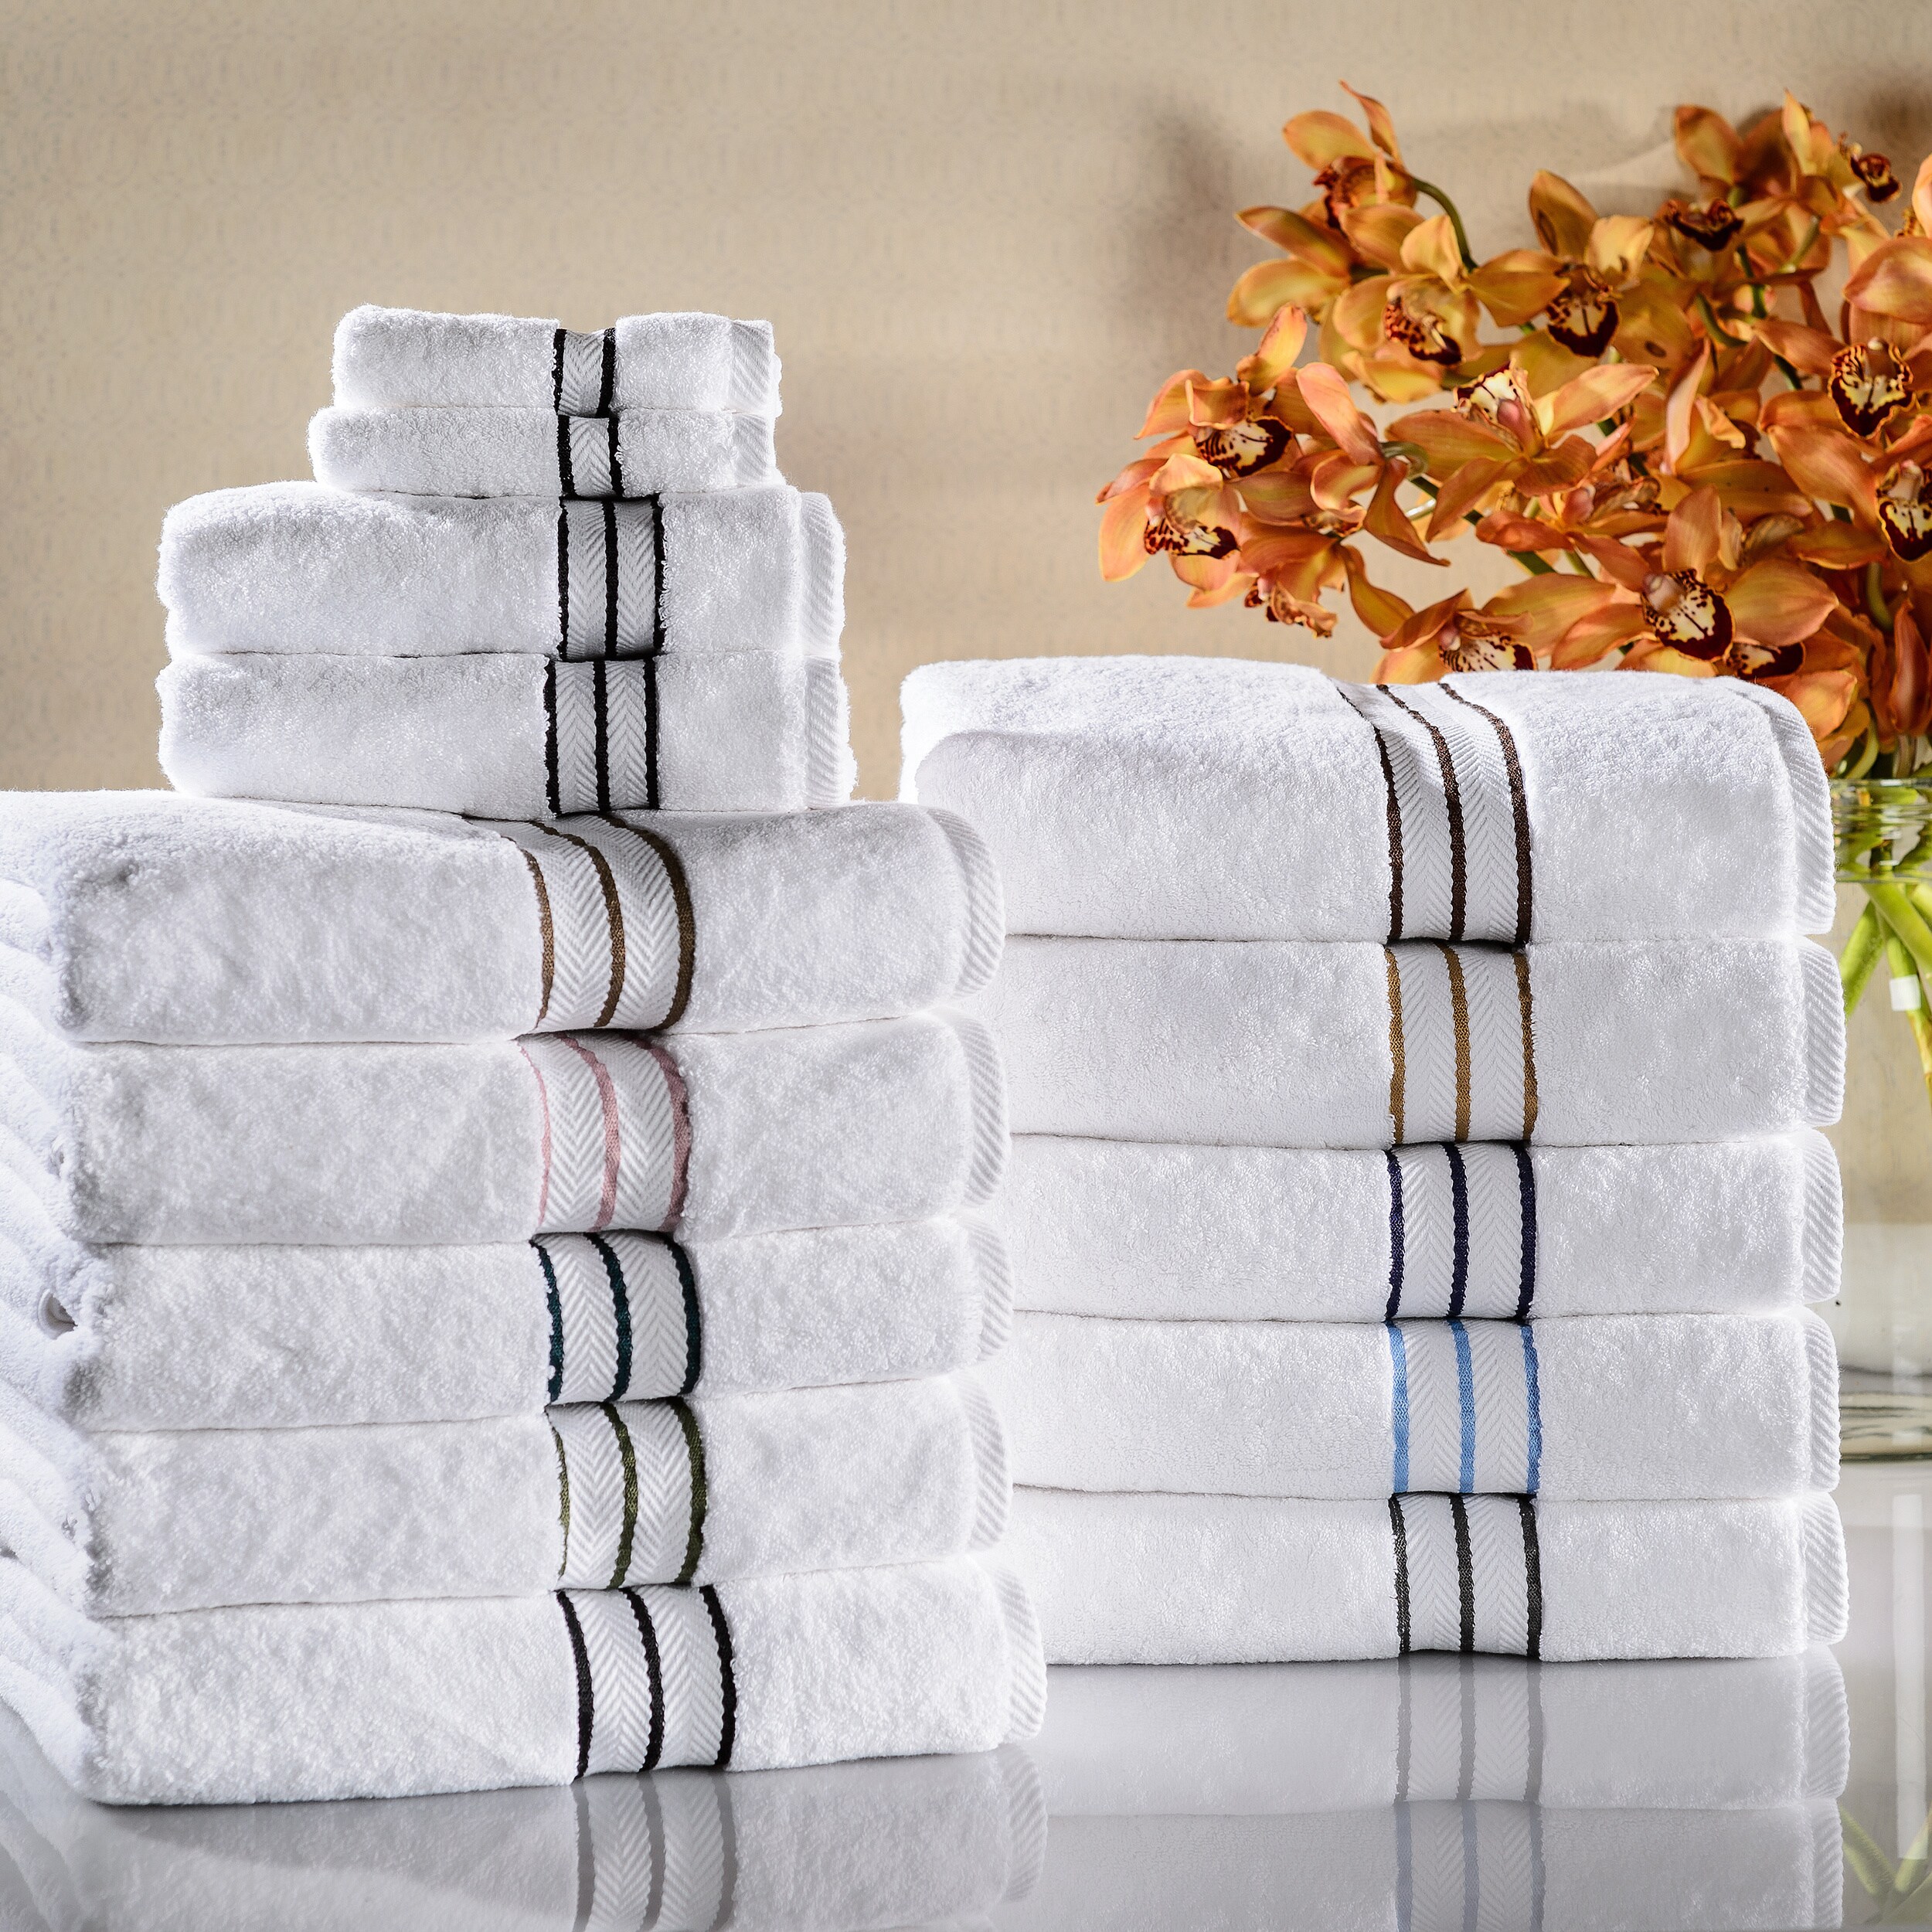 https://ak1.ostkcdn.com/images/products/12104779/Superior-Hotel-Collection-Luxurious-900GSM-Egyptian-Cotton-6-piece-Towel-Set-in-White-with-Chocolate-borders-As-Is-Item-1cd39ba6-d95f-435a-b8aa-9a9d10e2dfe6.jpg